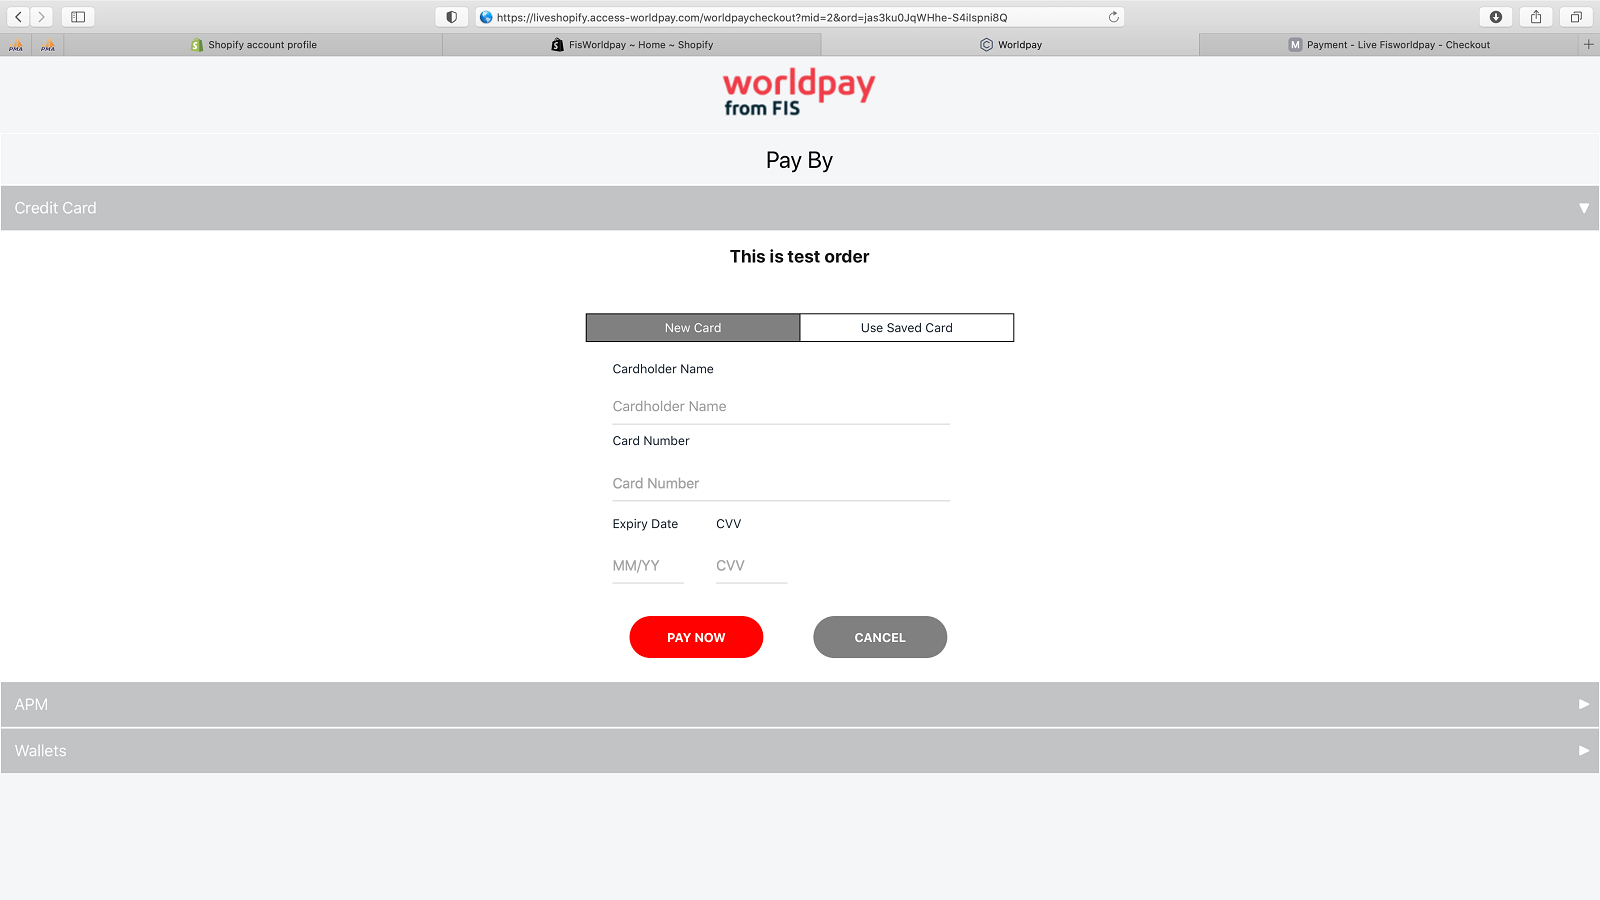 Payments Via Access Worldpay